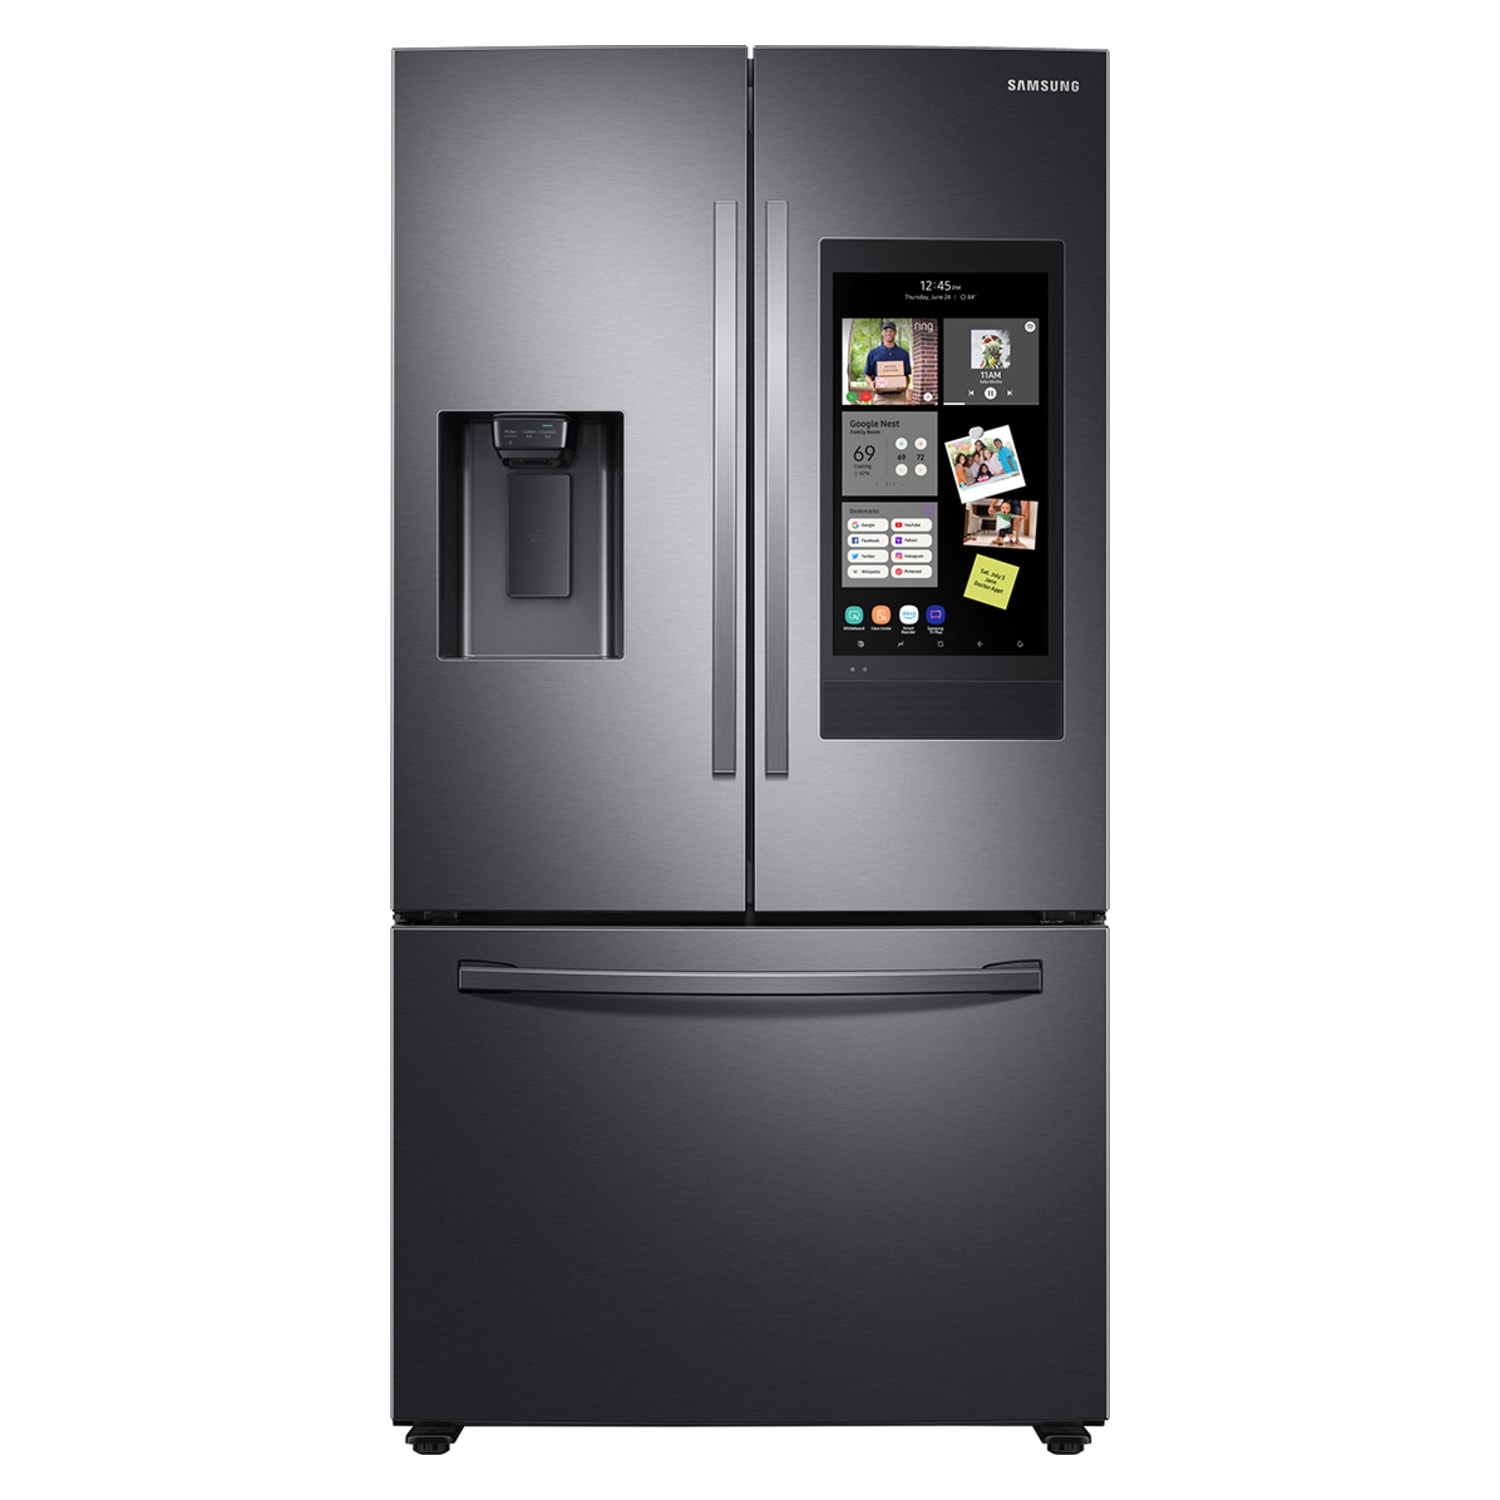 Samsung 26.5 cu. ft. French Door Refrigerator with Family Hub and External Water & Ice Dispenser - RF27T5501SG